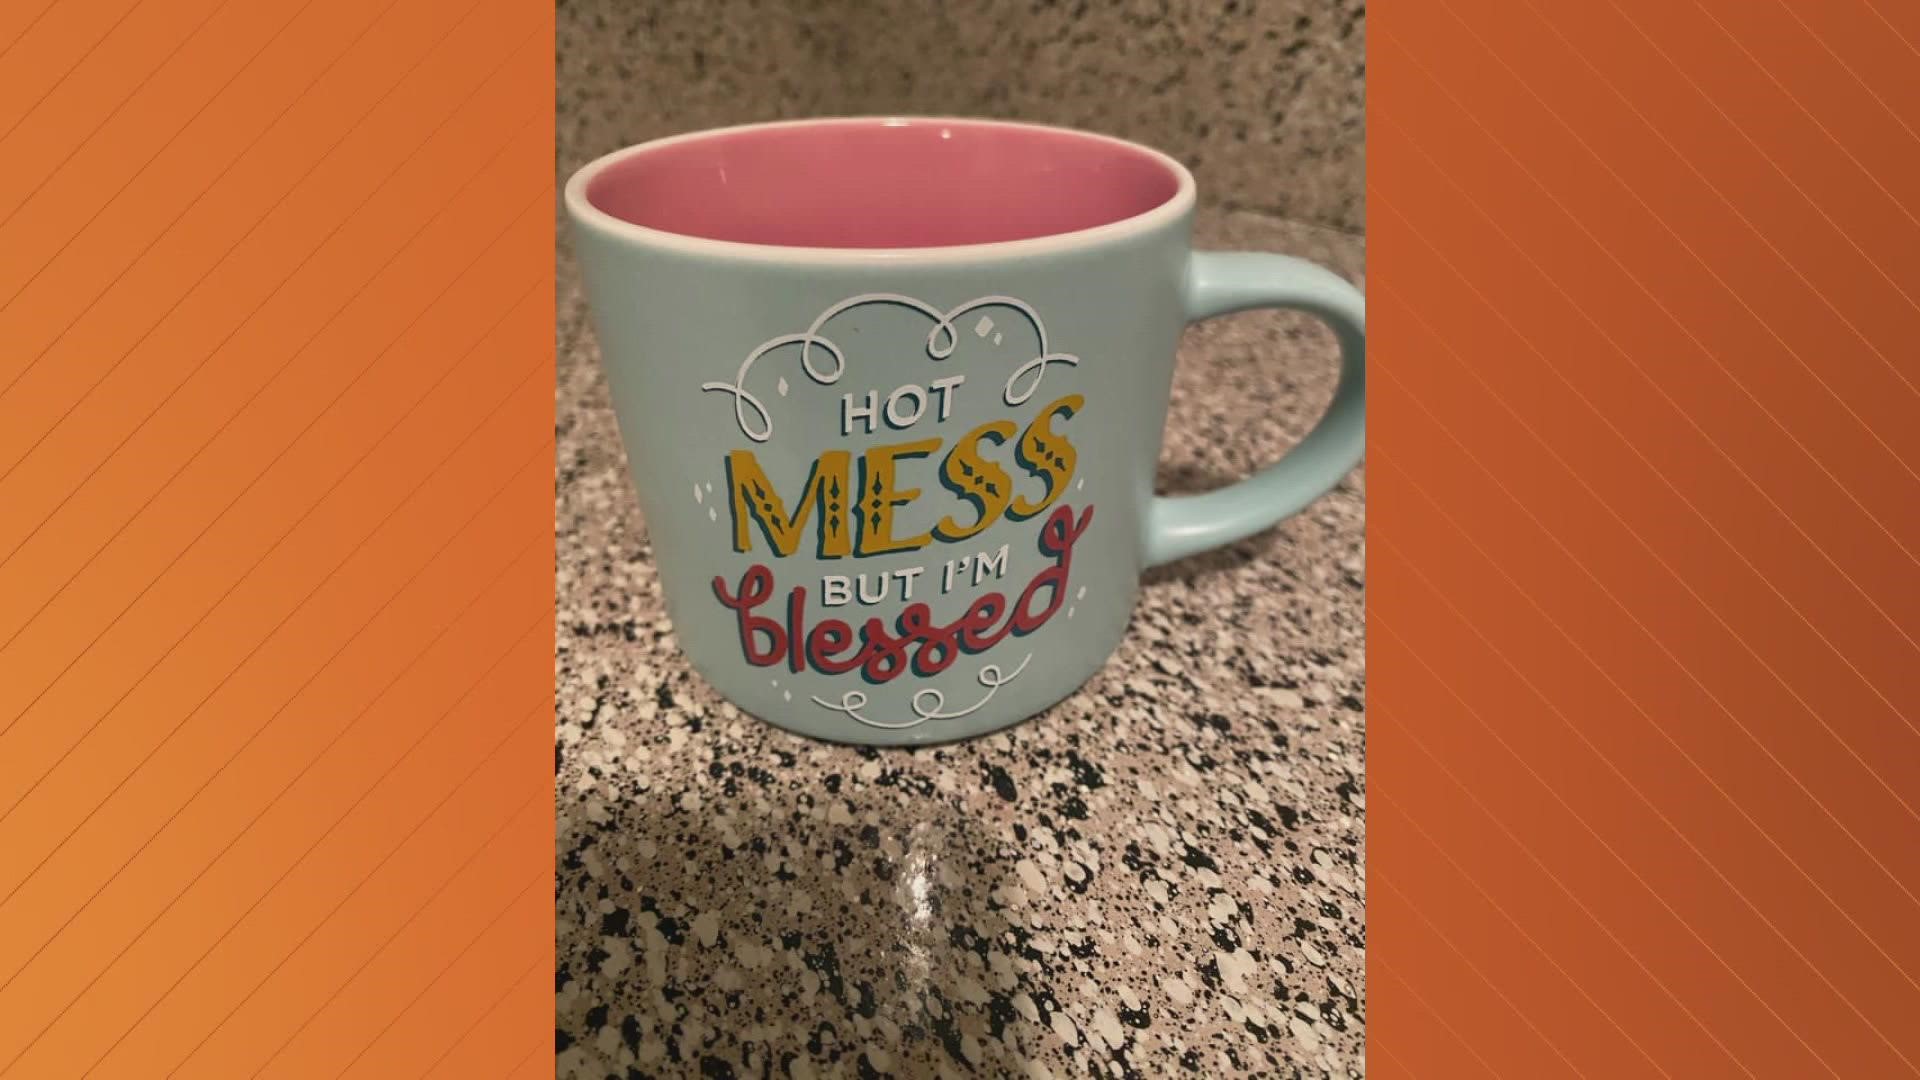 We asked for mugs and you delivered! Here's our viewers' favorite "hot cocoa mugs"